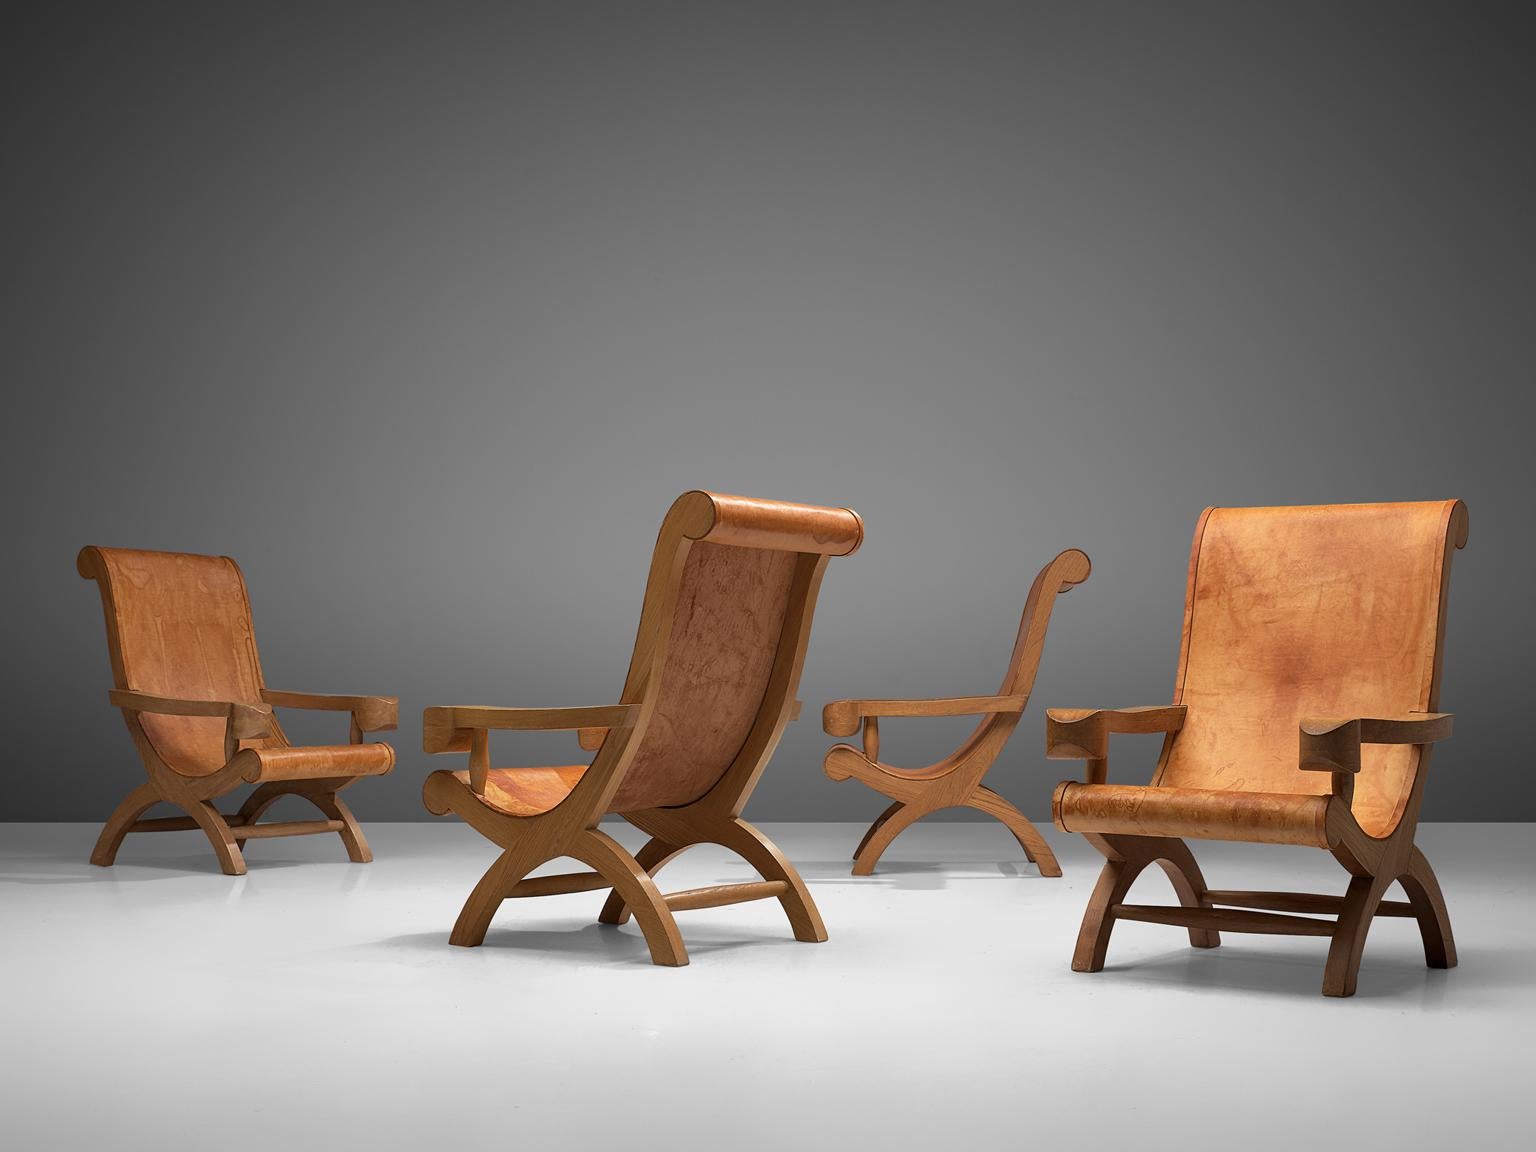 Clara Porset, 4 'Butaque' armchairs, leather and cypress wood, Mexico, circa 1947.

Wonderful set of Butaque chairs designed by Clara Porset. These chairs have an exotic look, due to Porset's combination of Modern desgin with Mexican